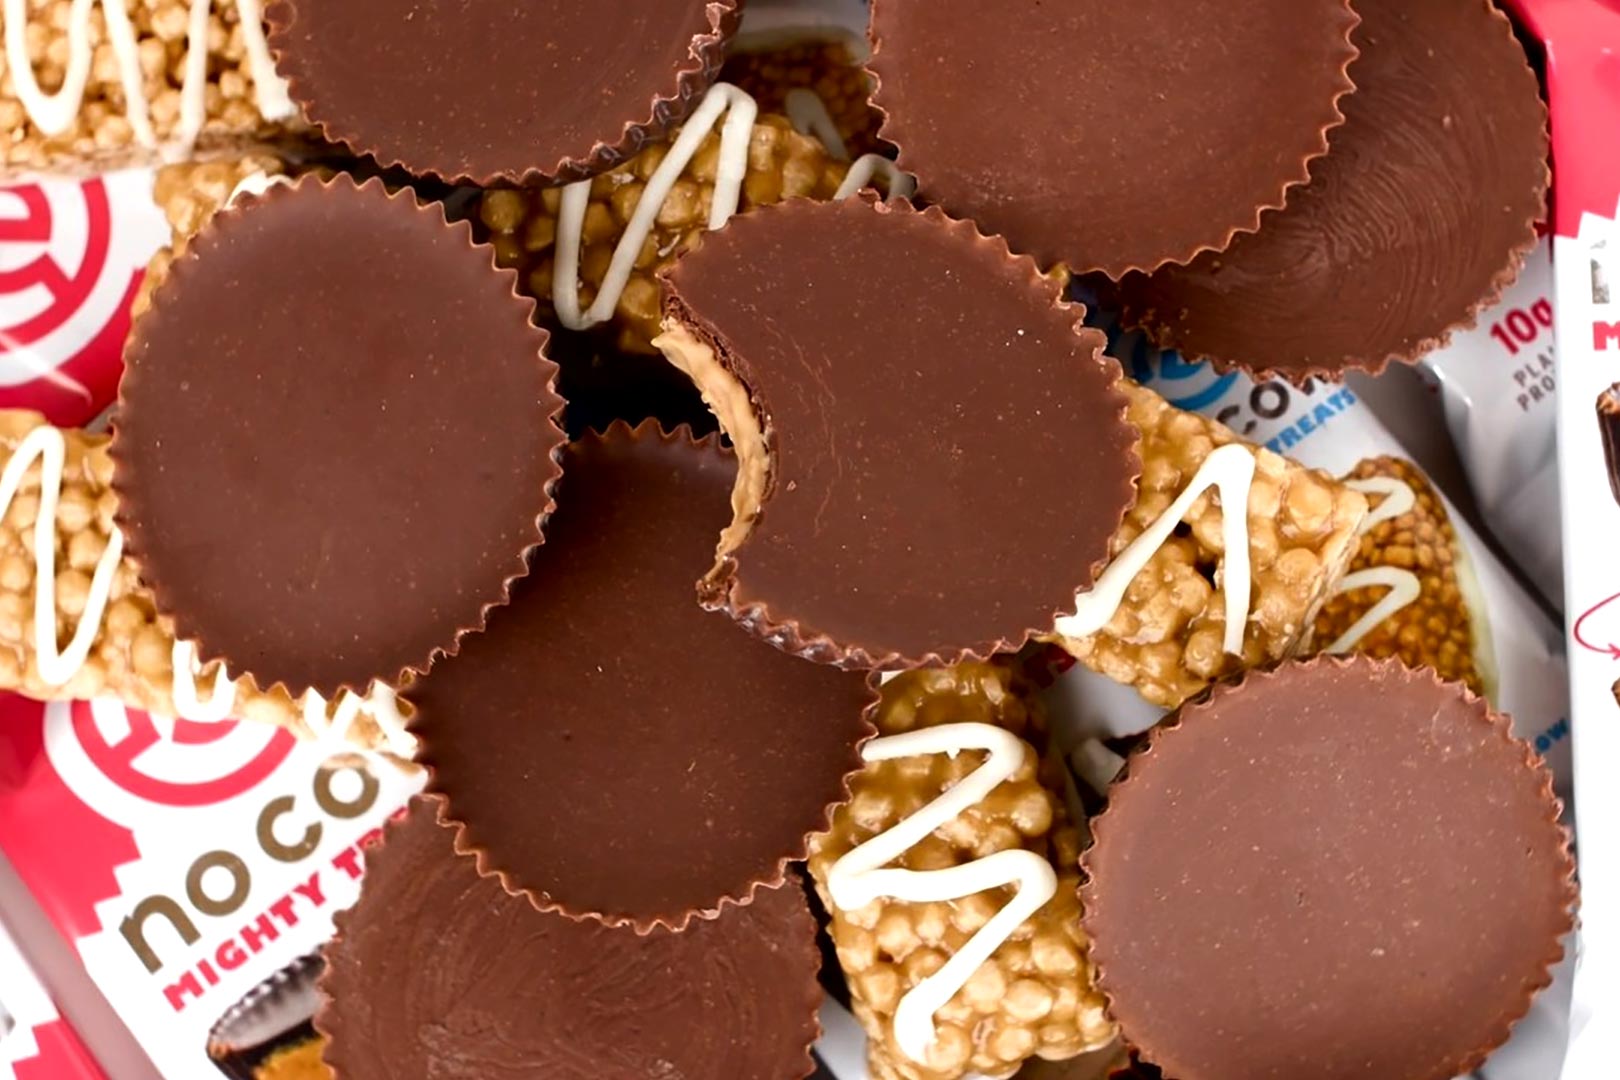 No Cow Announces Mighty Treats Bar And Peanut Butter Cups